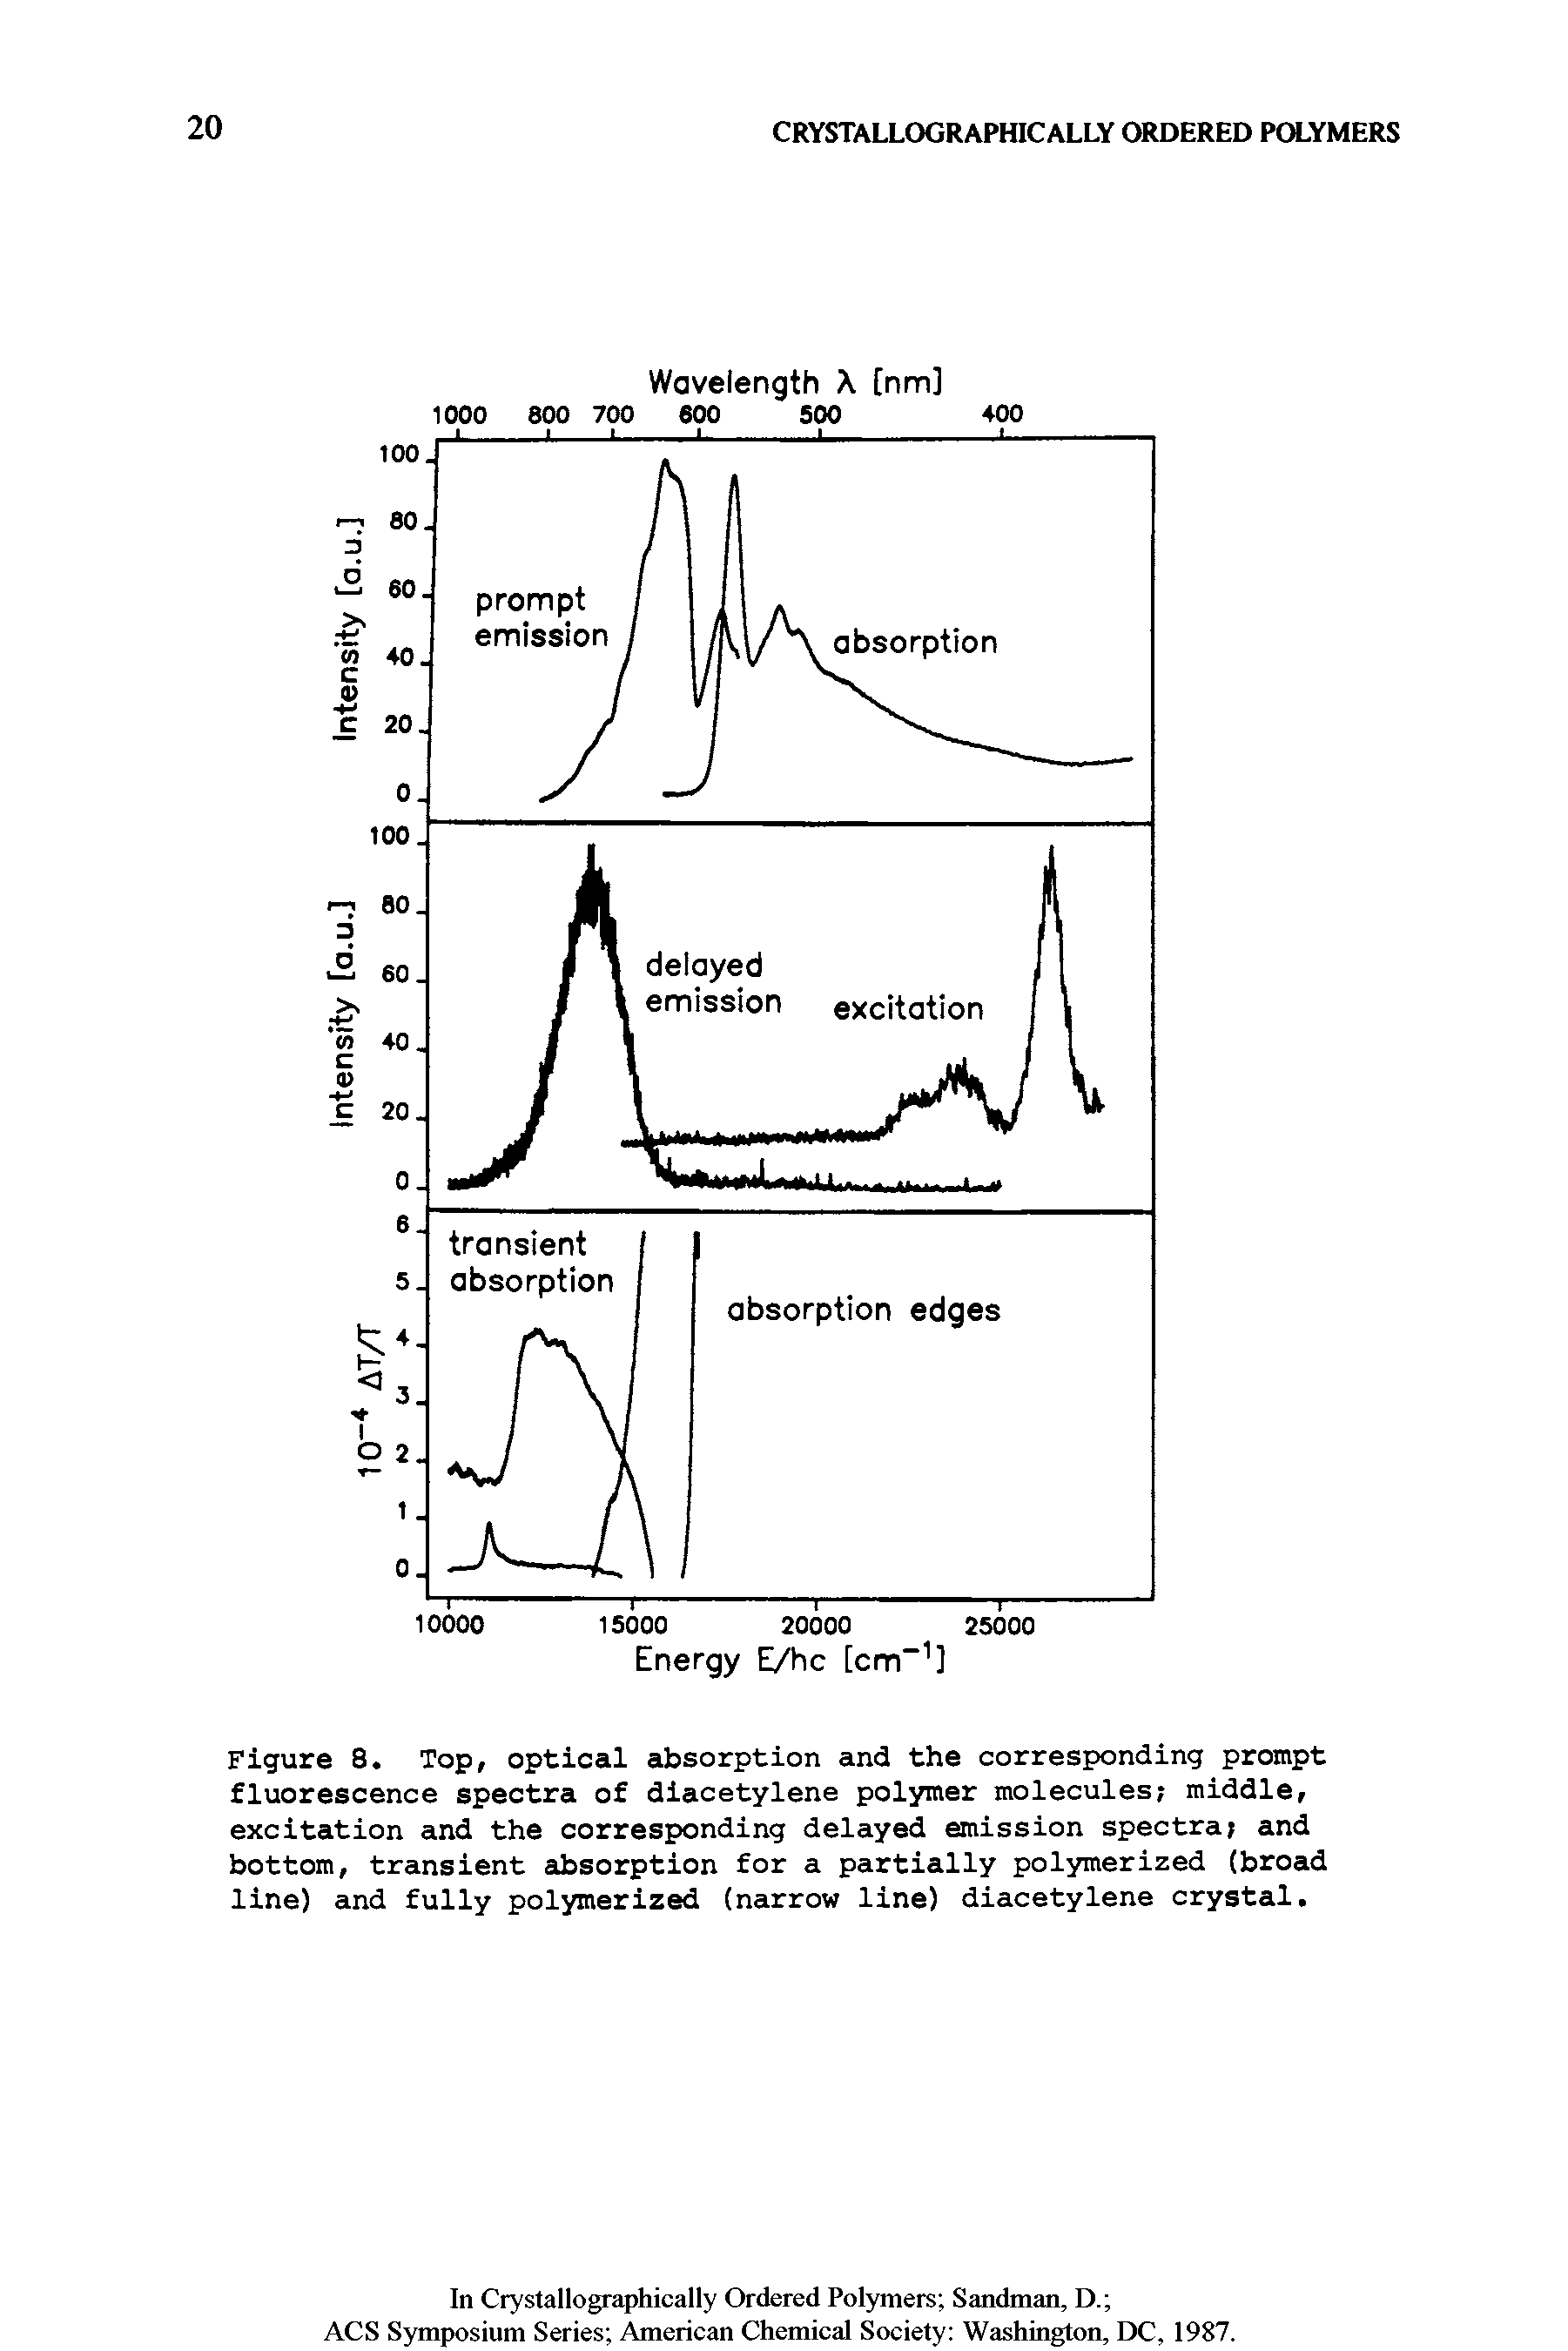 Figure 8. Top, optical absorption and the corresponding prompt fluorescence spectra of diacetylene polymer molecules middle, excitation and the corresponding delayed emission spectra and bottom, transient absorption for a partially polymerized (broad line) and fully polymerized (narrow line) diacetylene crystal.